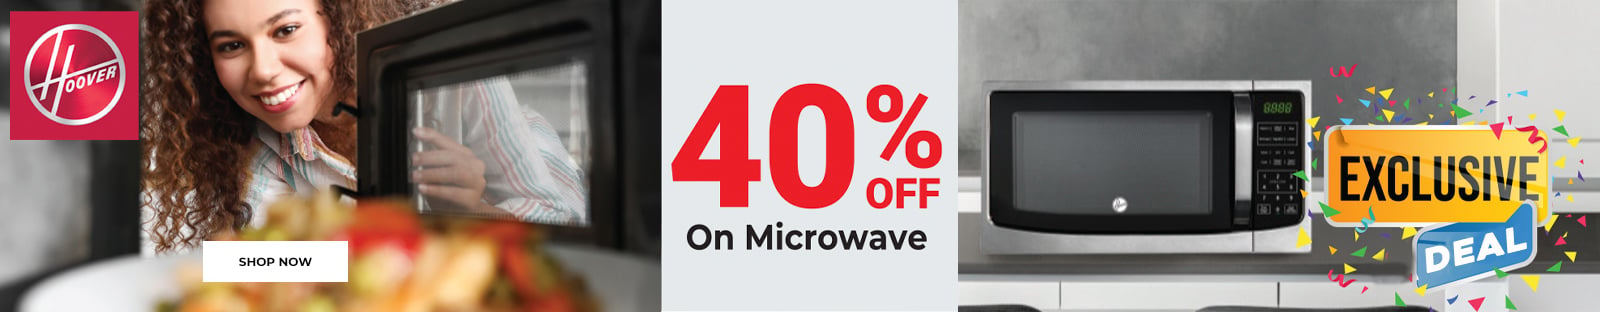 Hoover 40 % Off Web